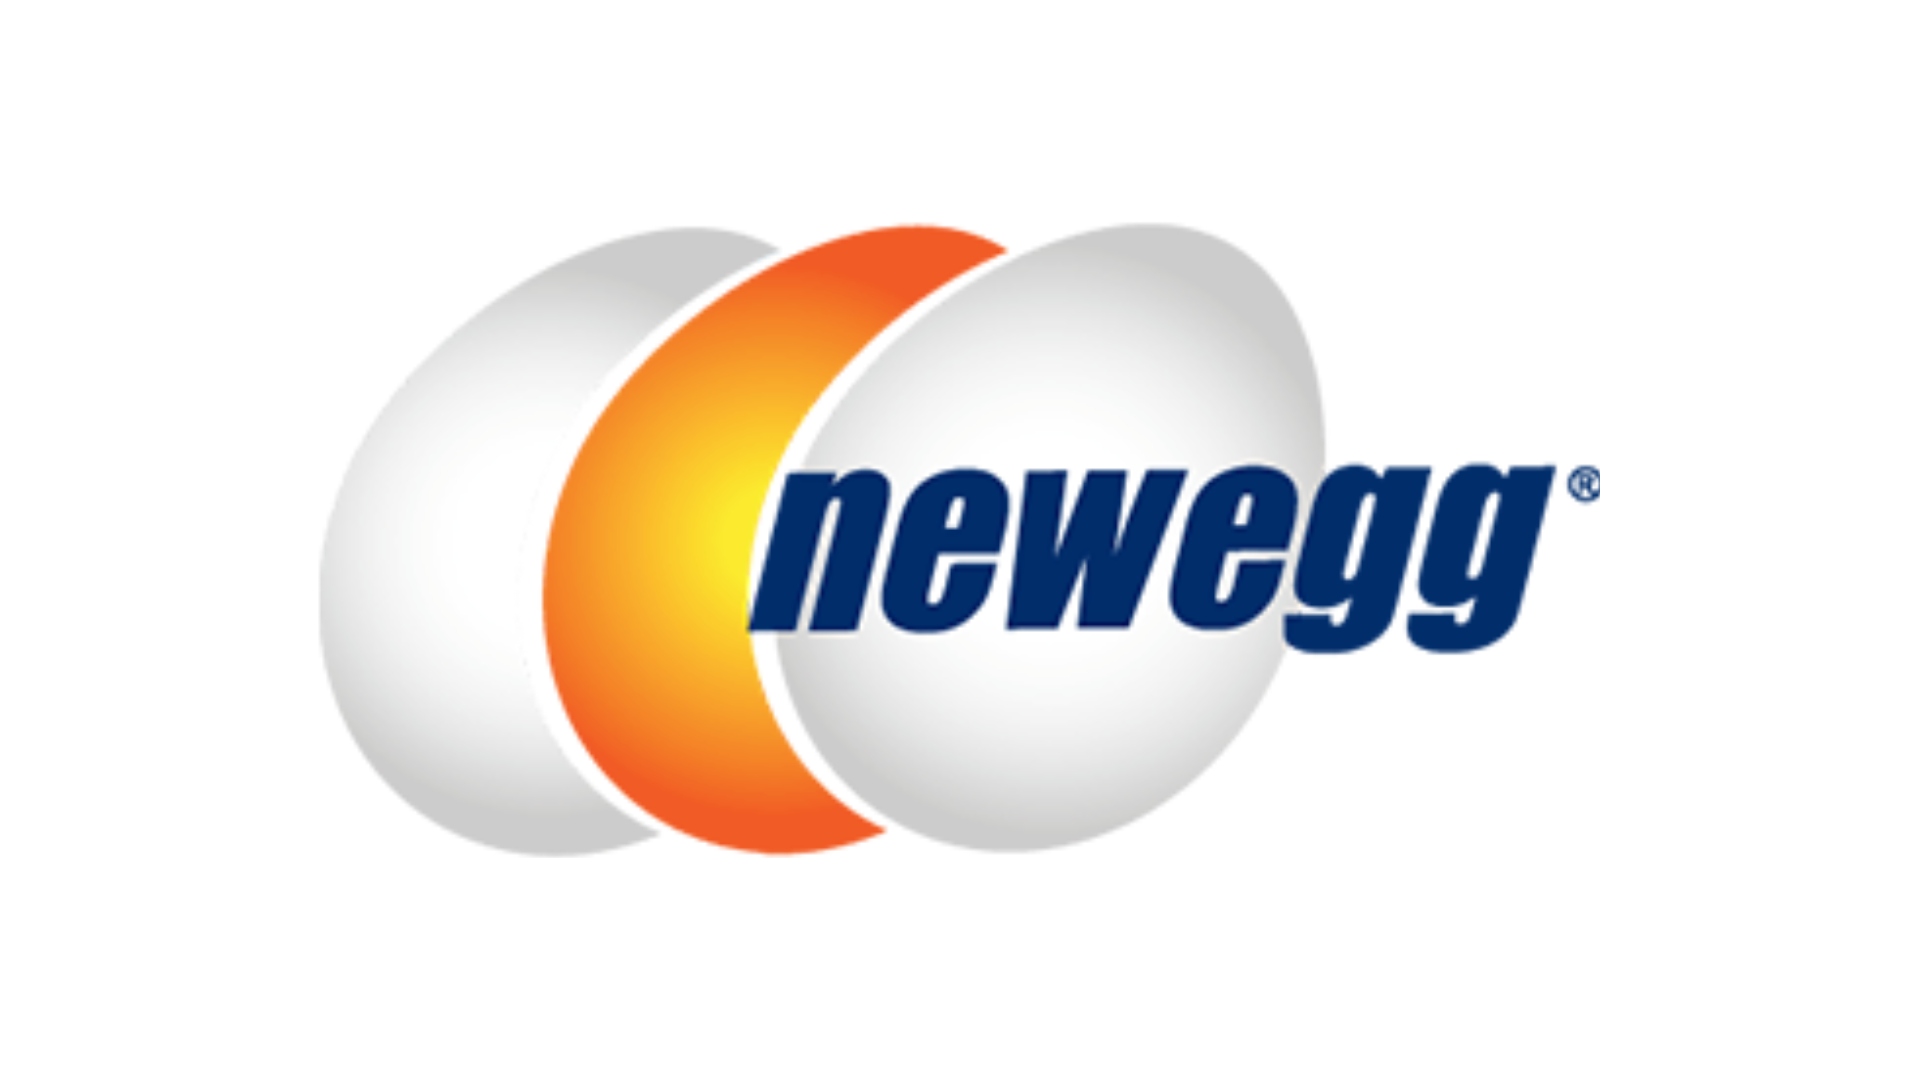 Best websites for custom PC builds, number 2: Newegg. It logo is on a white background.